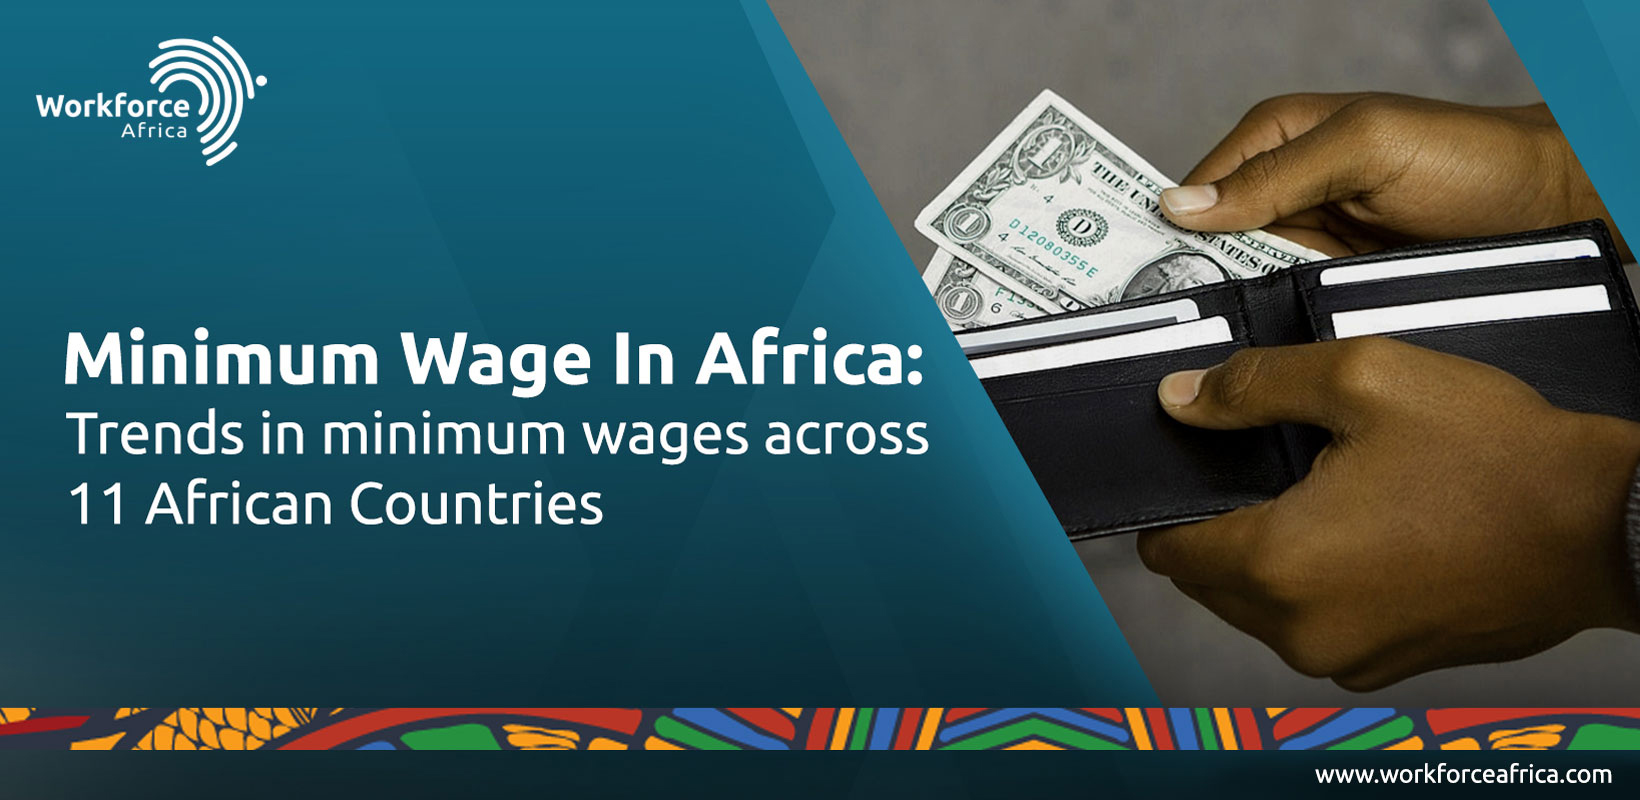 Minimum Wage In Africa Trends in Minimum Wages Across 11 African